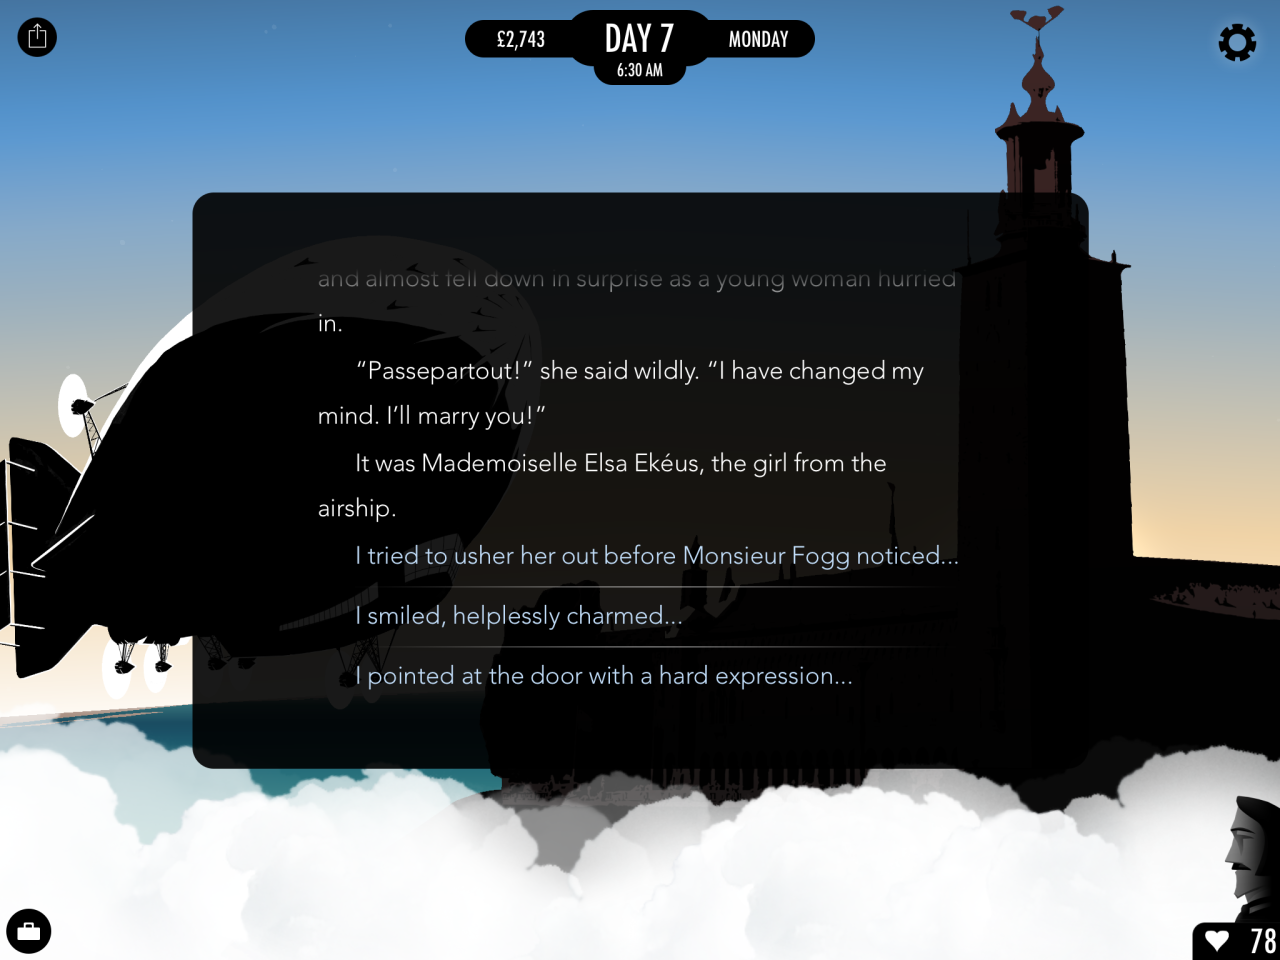 Interactive text is the basis of Inkle Studios' 80 Days, a reworking of Jules Verne's classic adventure novel. 